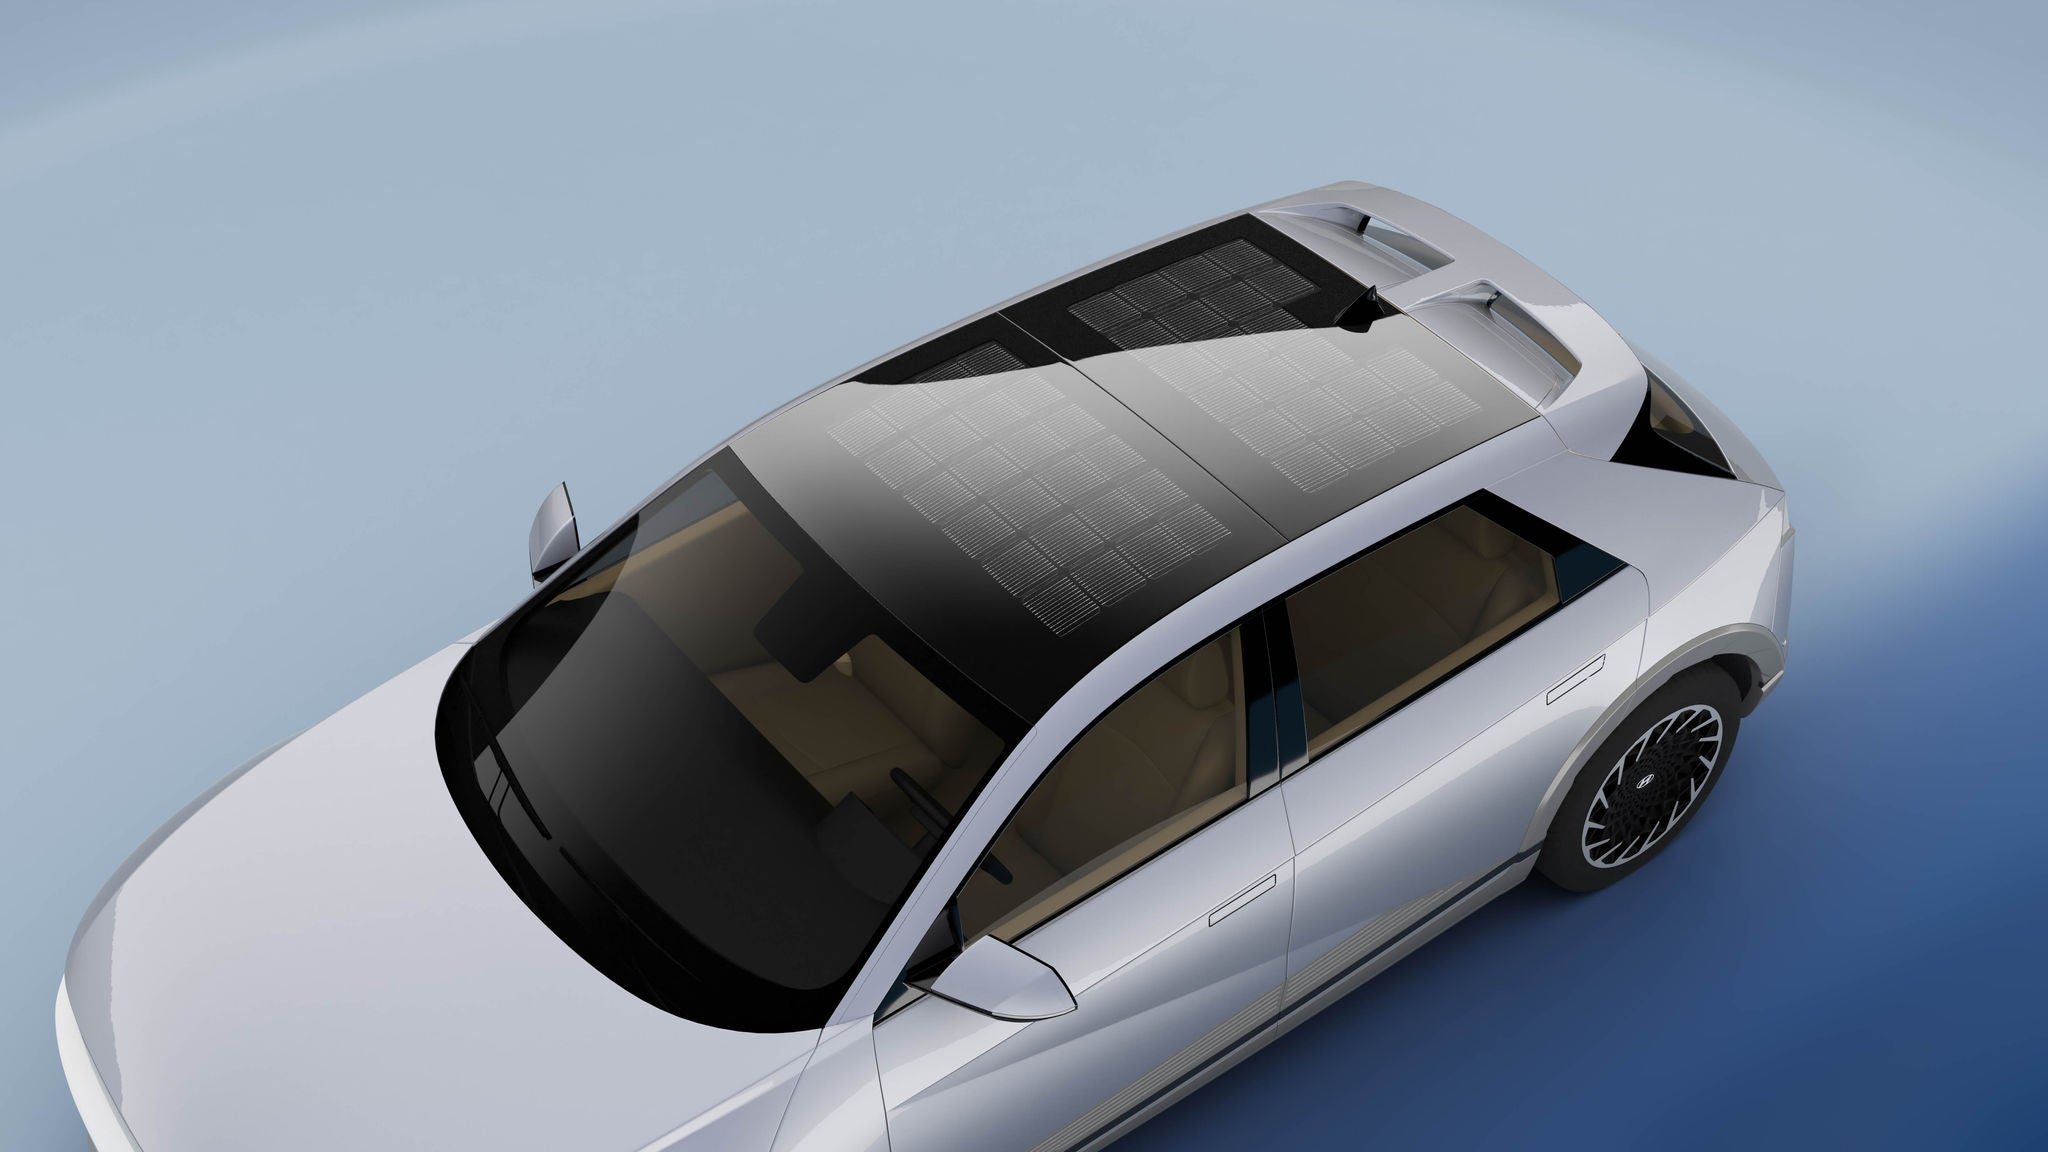 Solar cells in openable car roof